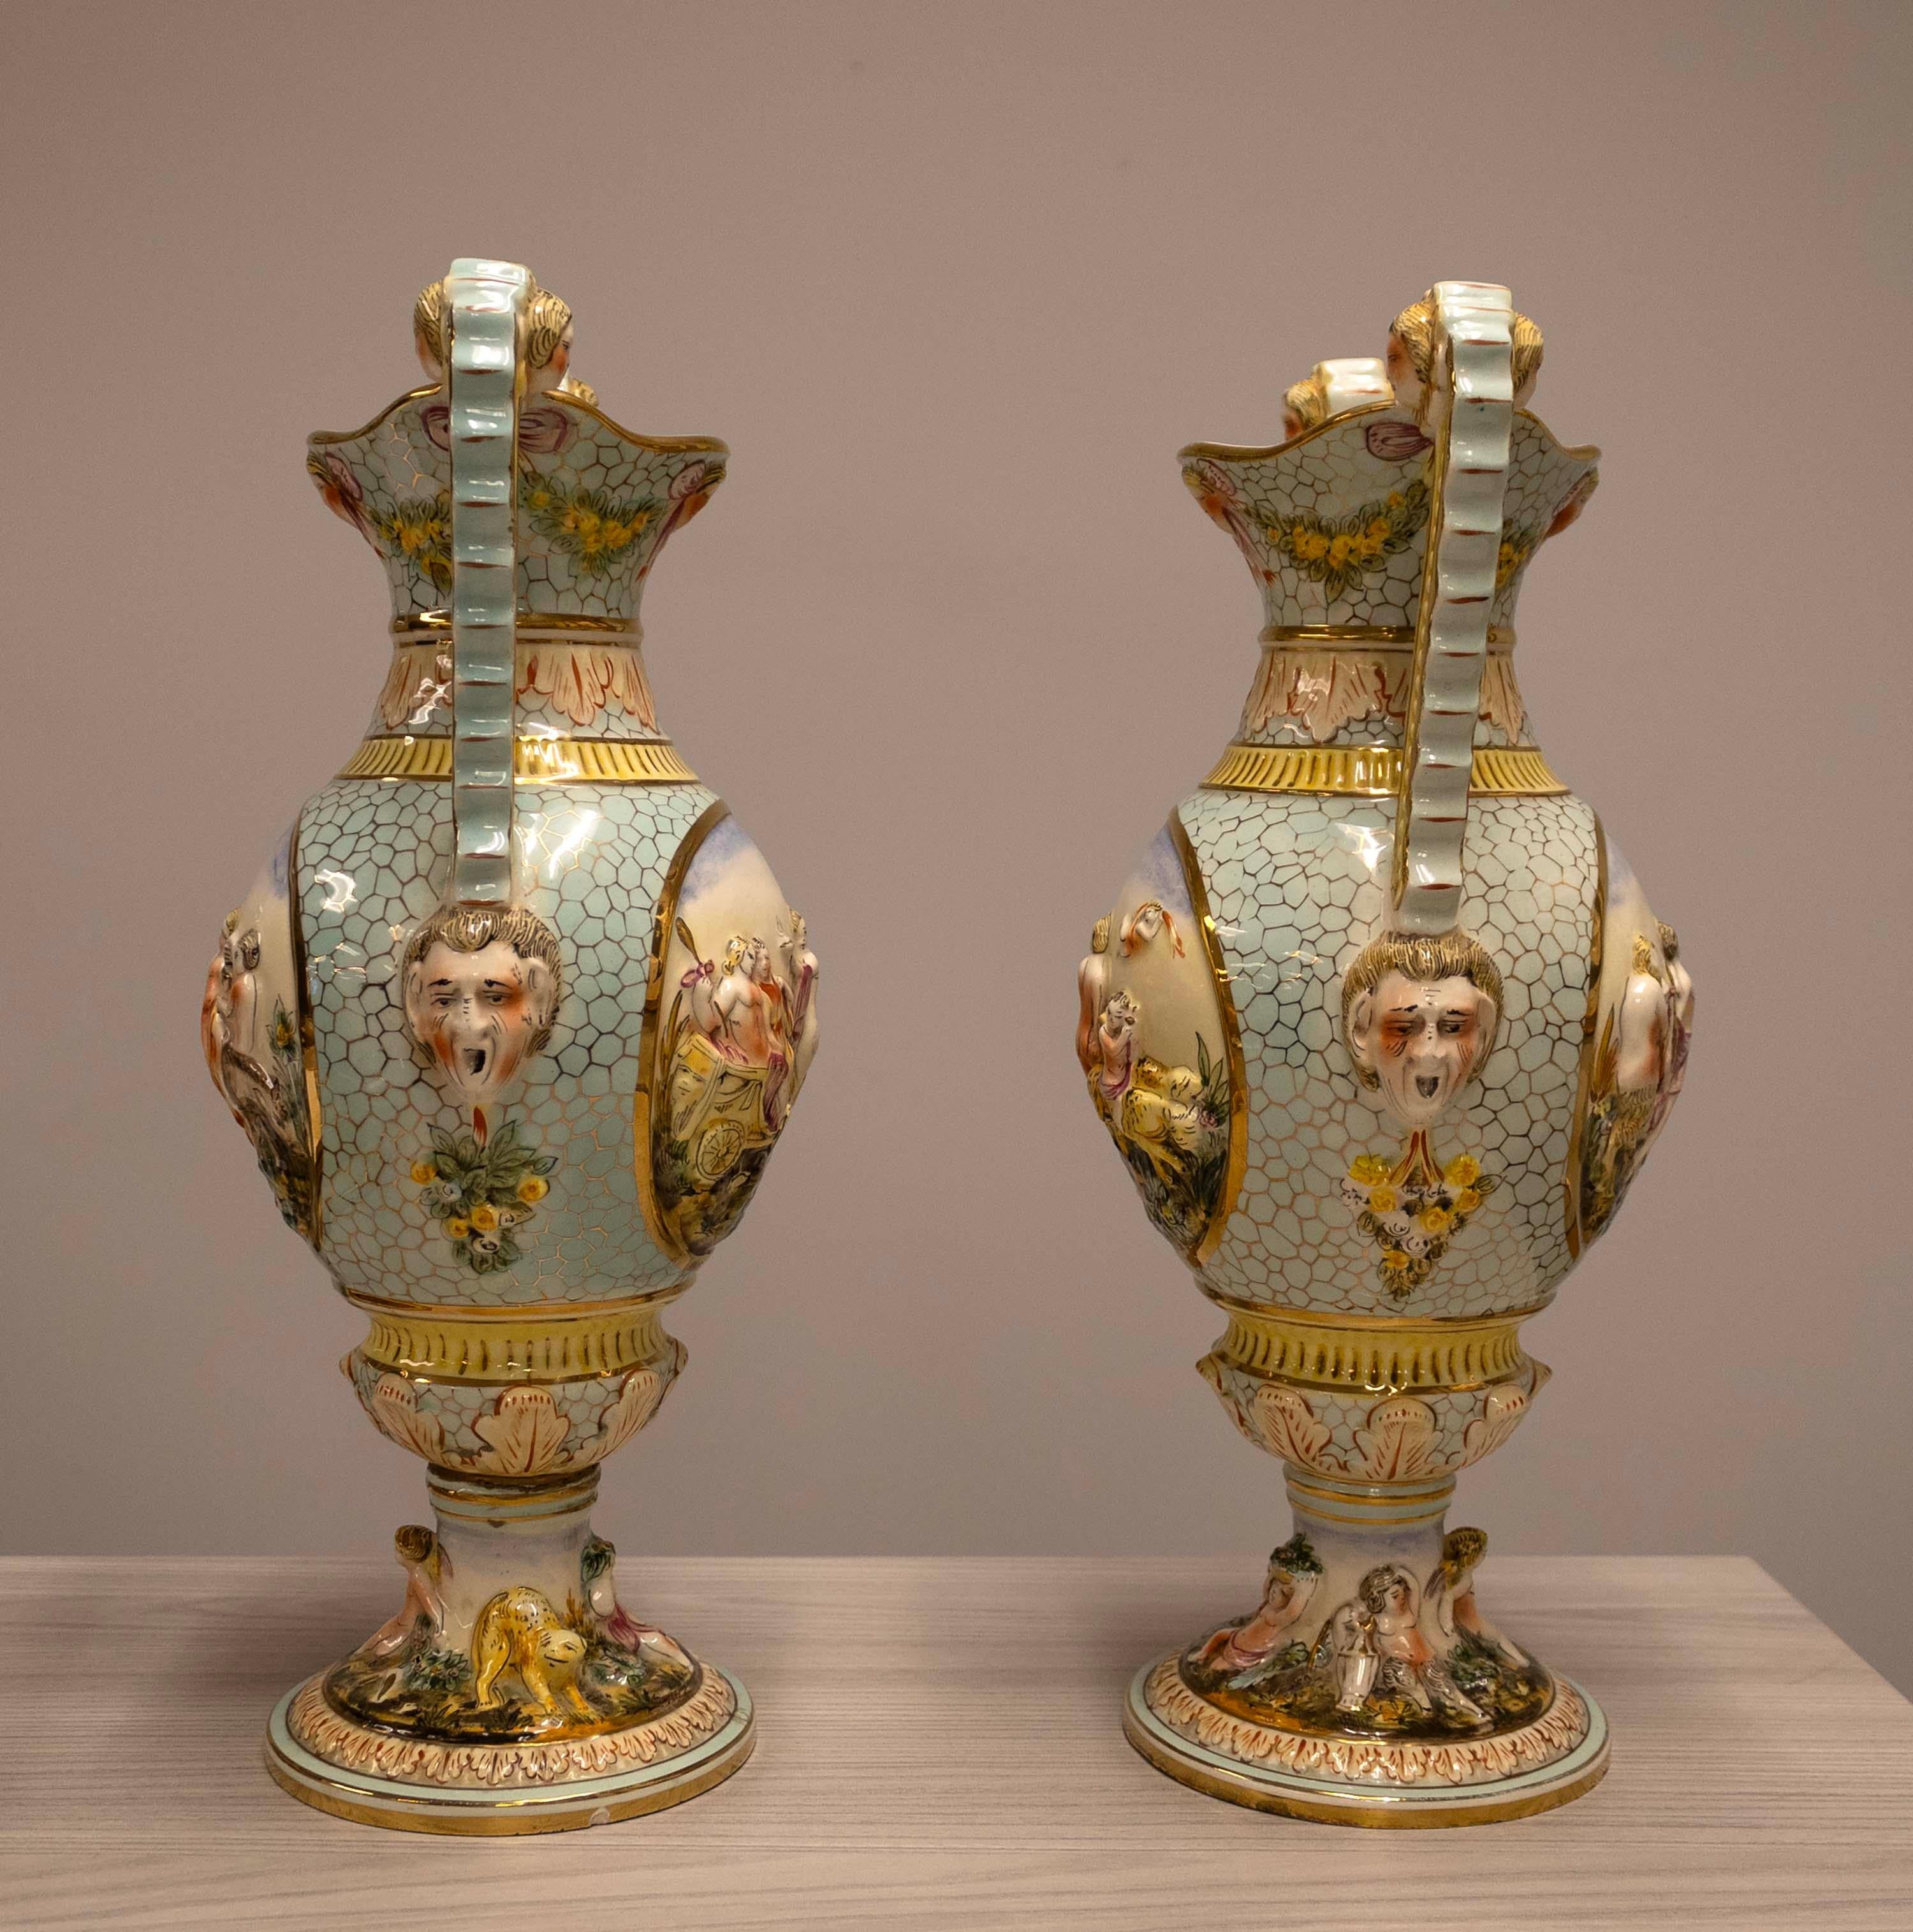 Antique Capodimonte Pair Ornate Classical Design Porcelain Vessels 2090 Italy In Good Condition For Sale In Keego Harbor, MI